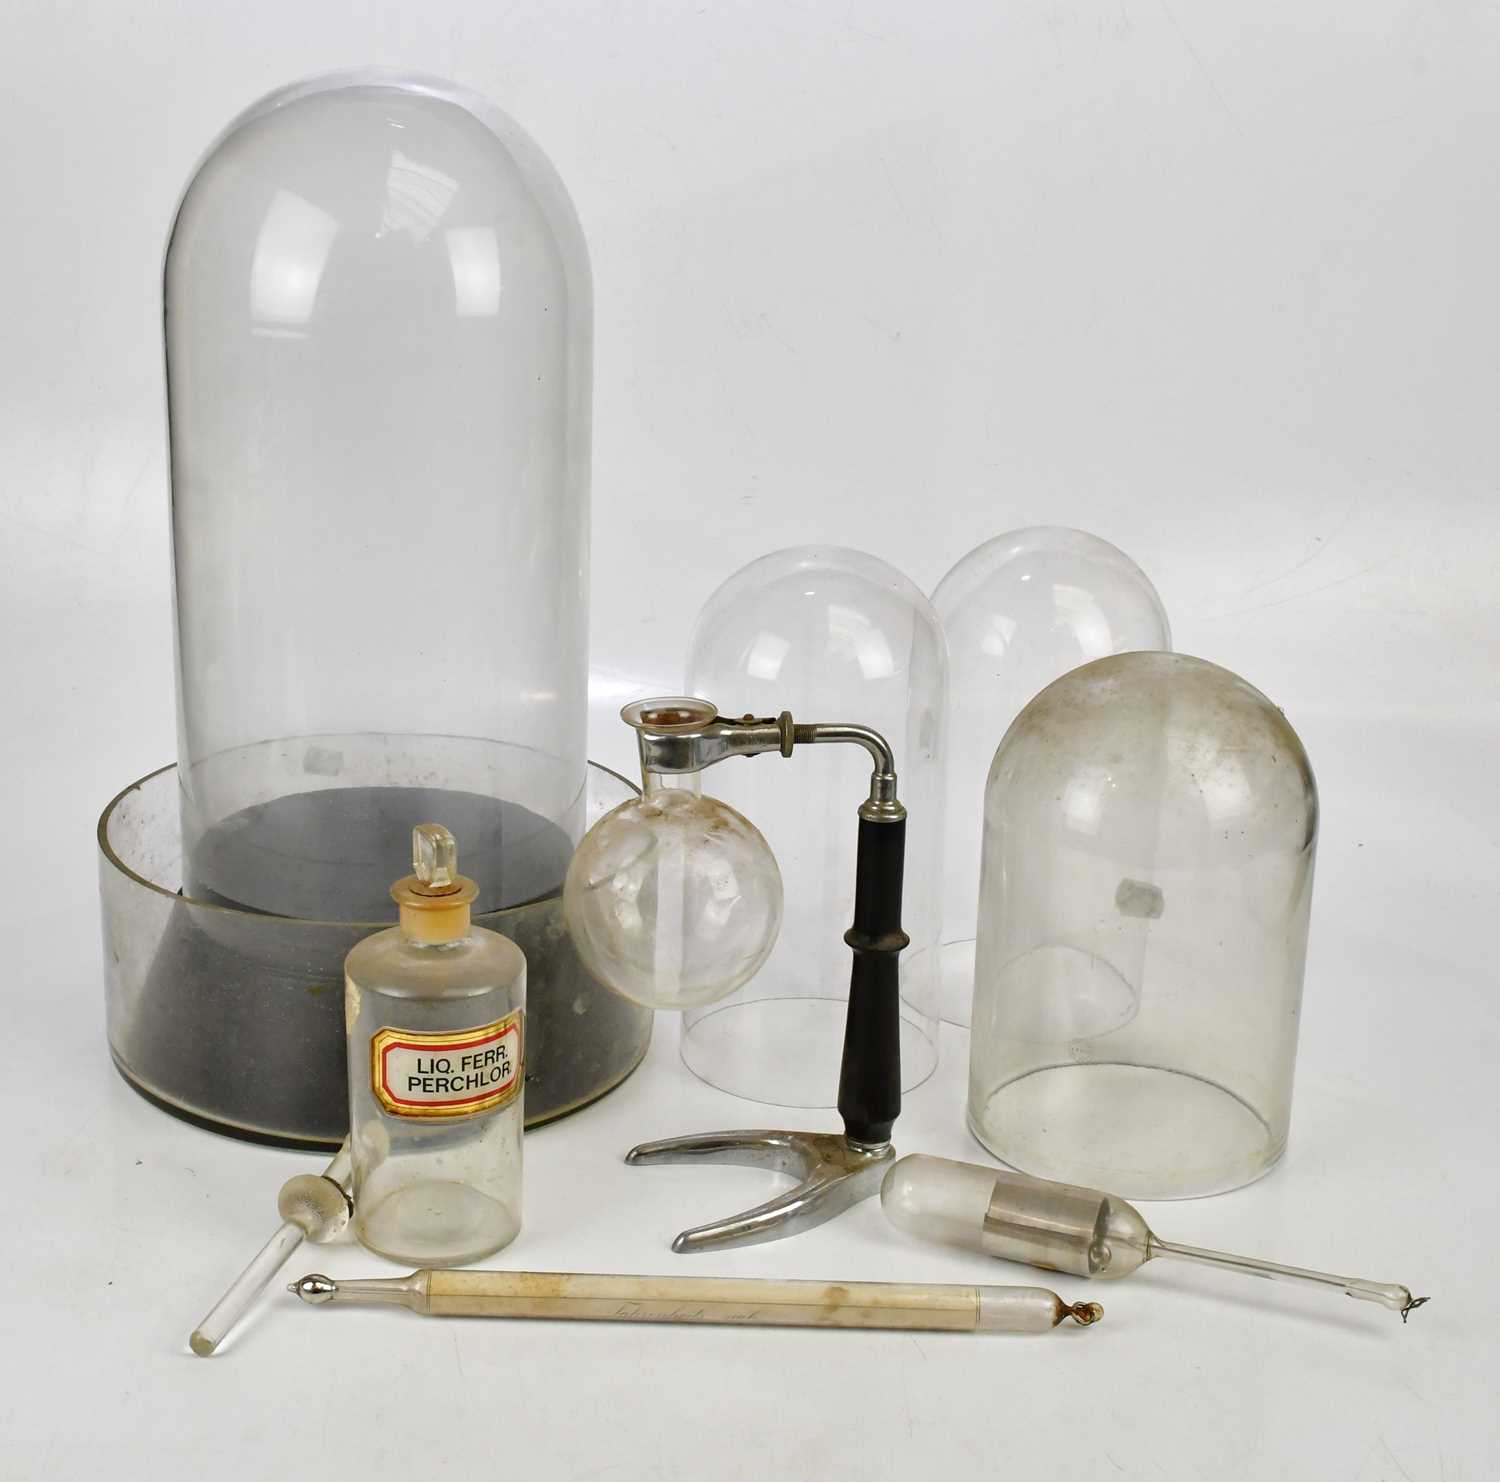 A glass apothecary jar and cover, with label for ‘Liq. Ferr Perchlor’, height 19.5cm, with a glass